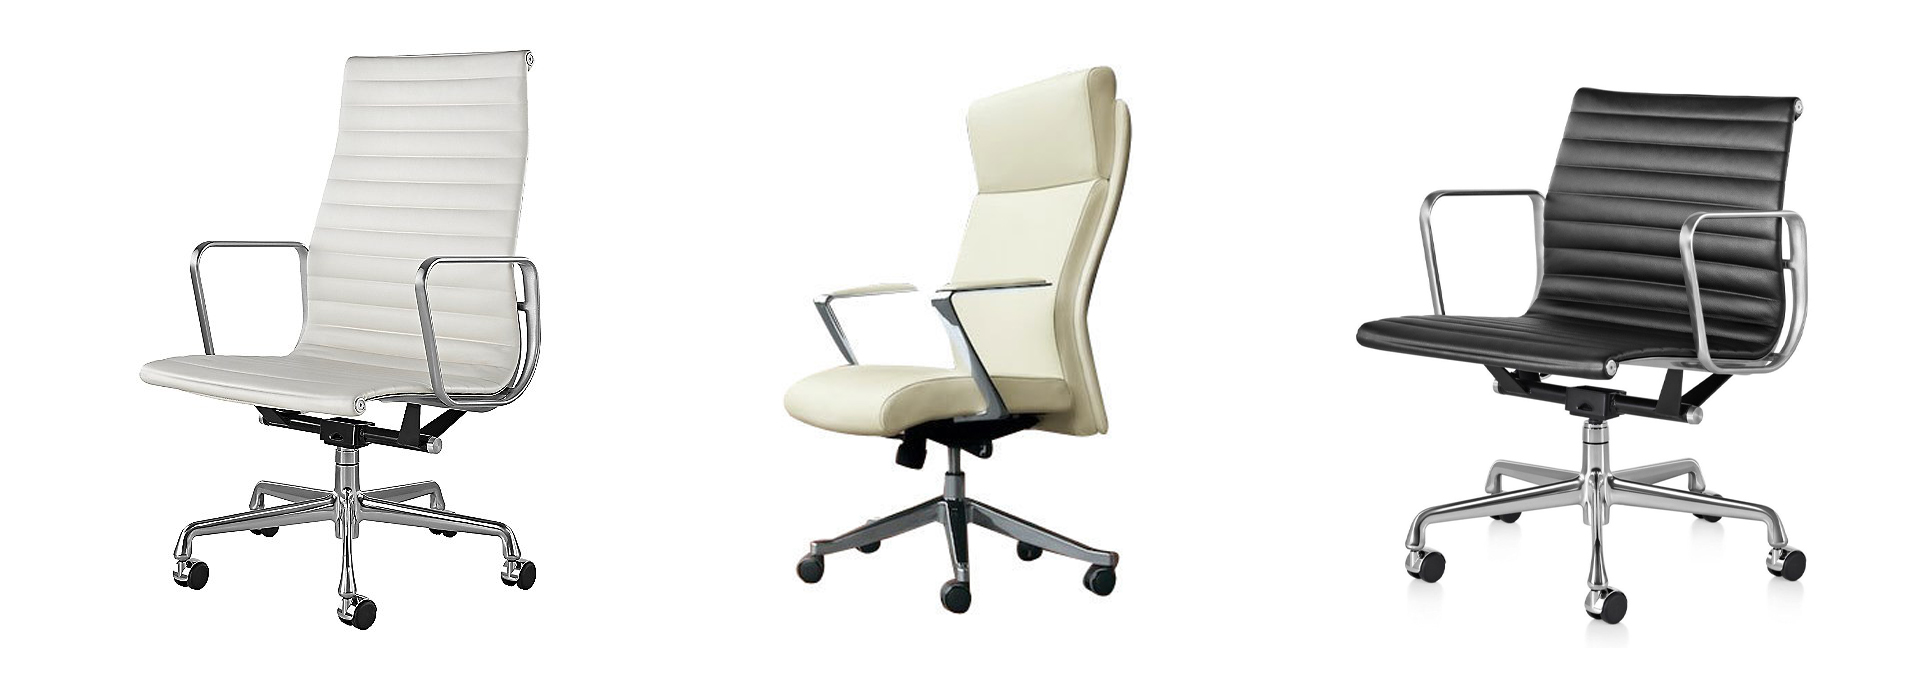 3 Finding High-Quality Office Chairs Toronto